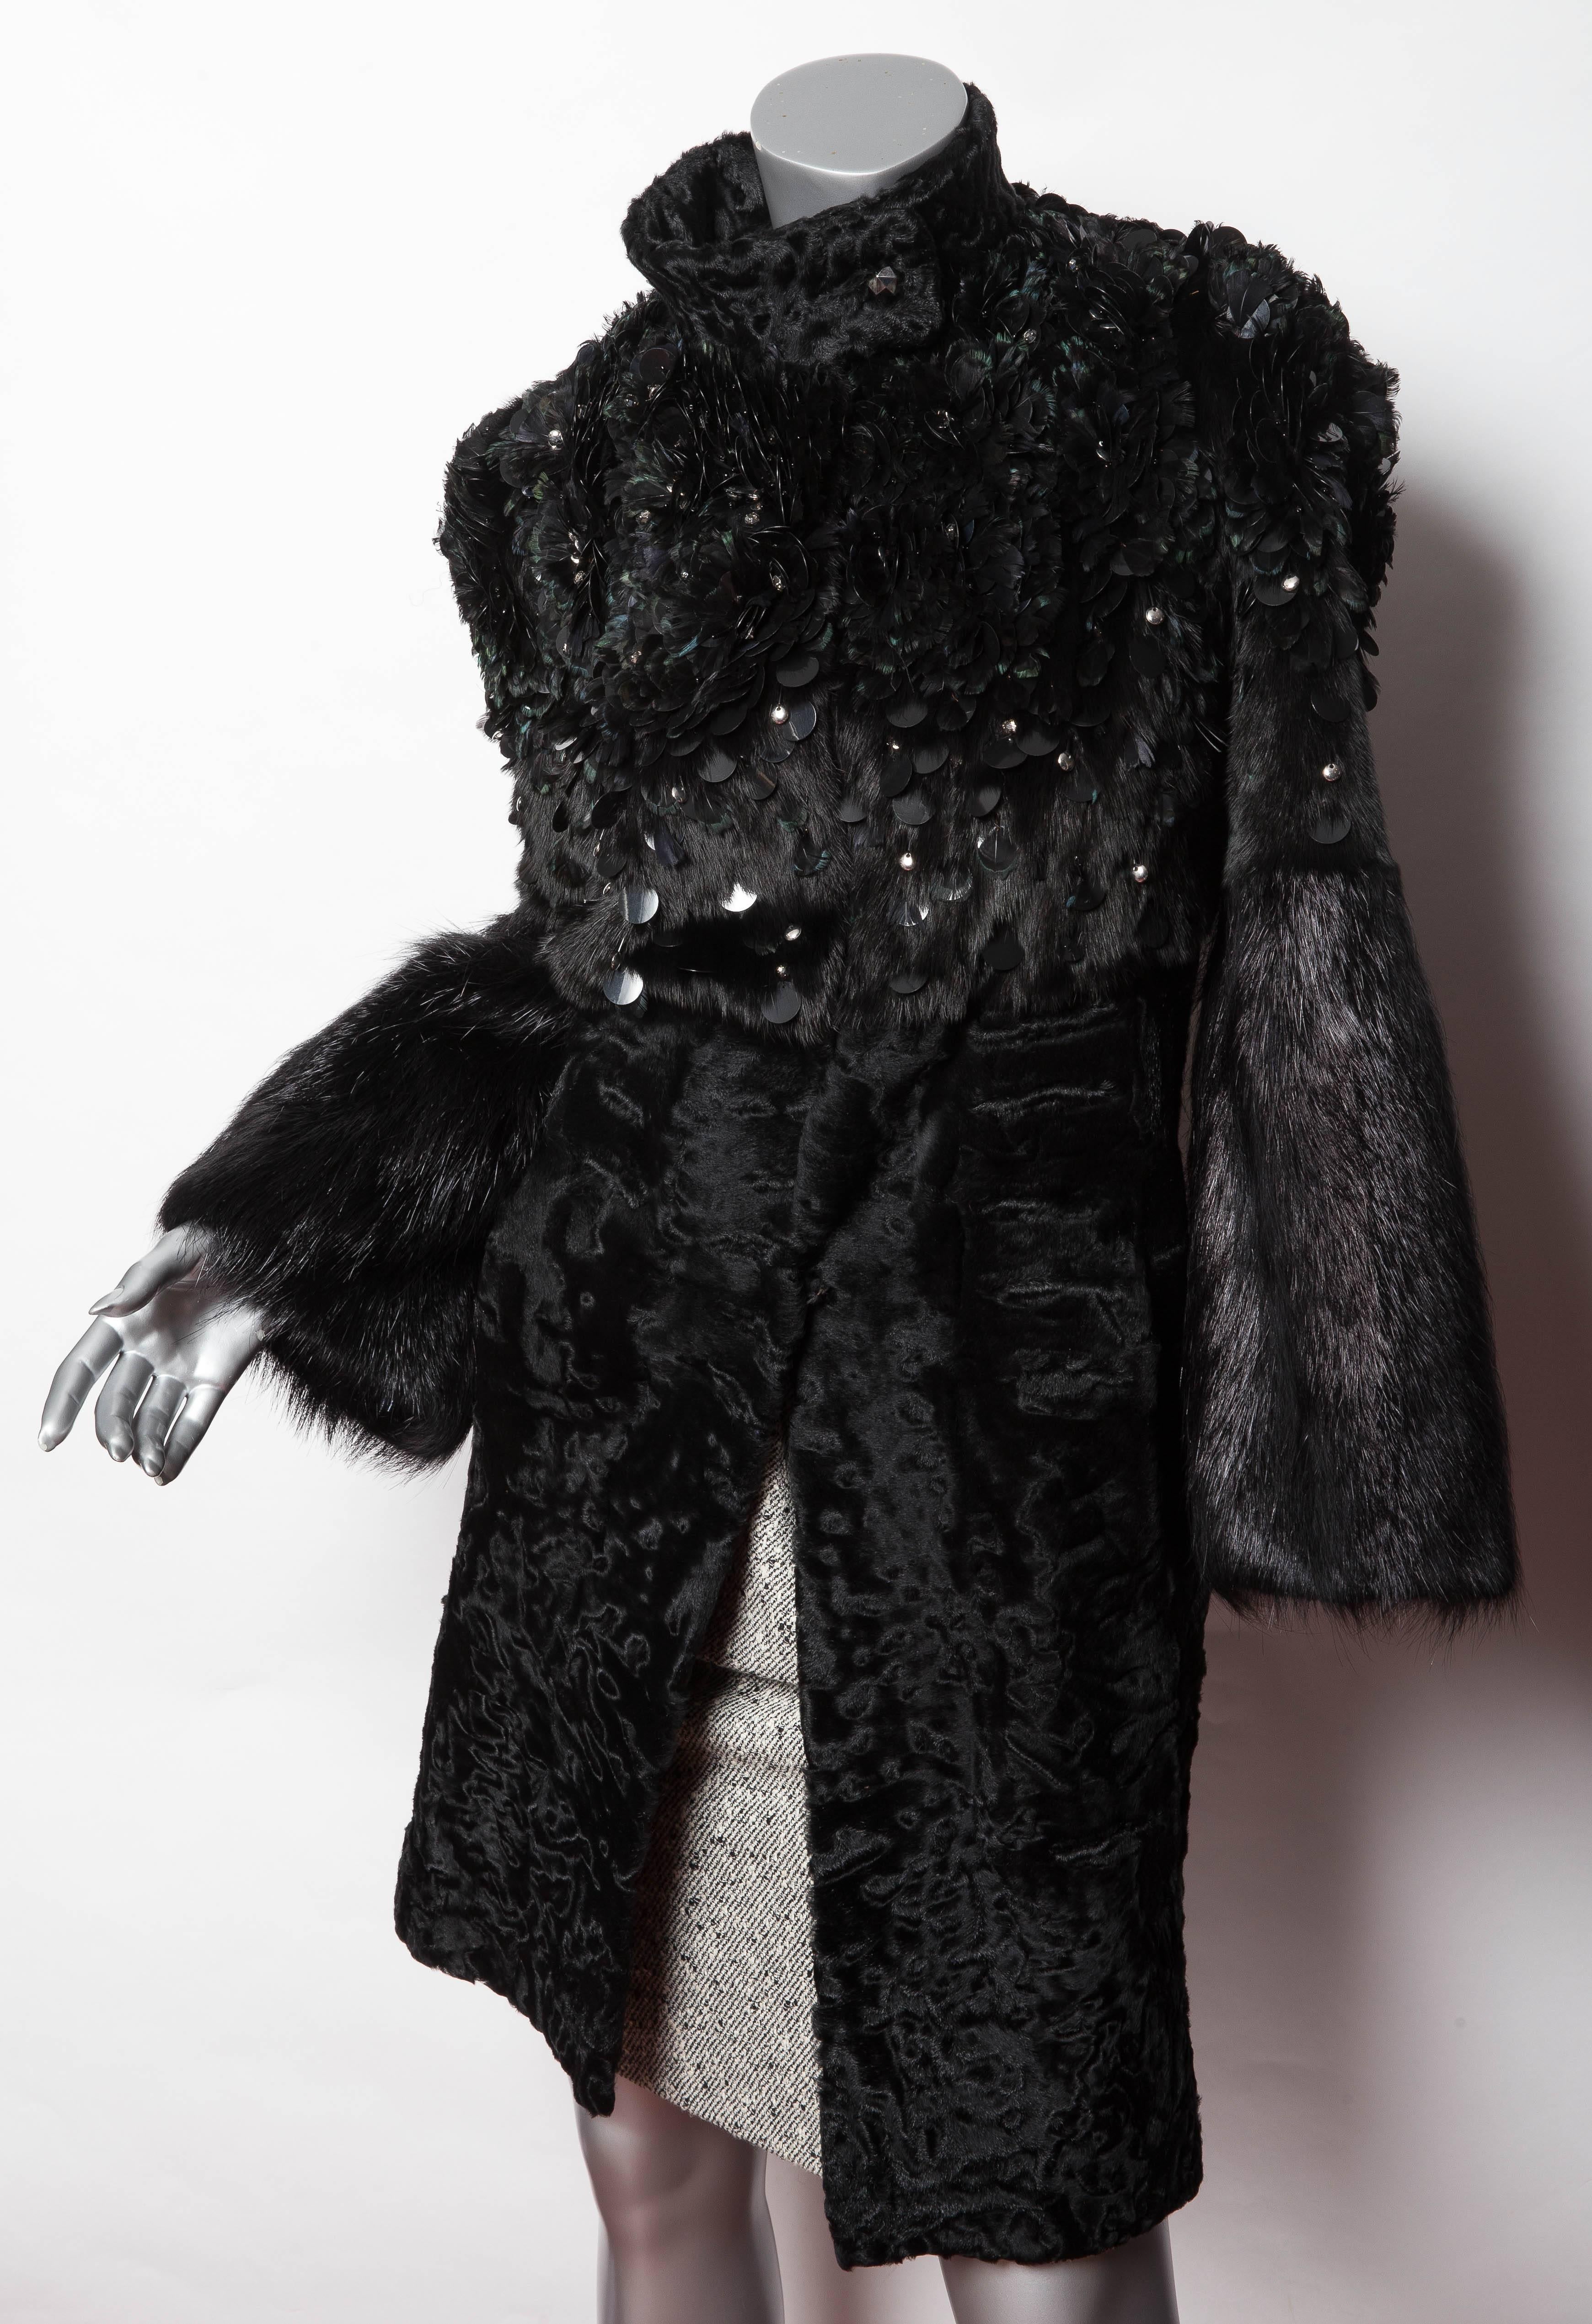 Gucci Runway Persian Lamb and Mink Coat. Gucci Persian Lamb and Mink Coat embellished with Peacock Feathers, Paillettes and Crystals. The top 1/3rd of the coat features mink and graduates to lamb just under the bust. The sleeves feature long hair